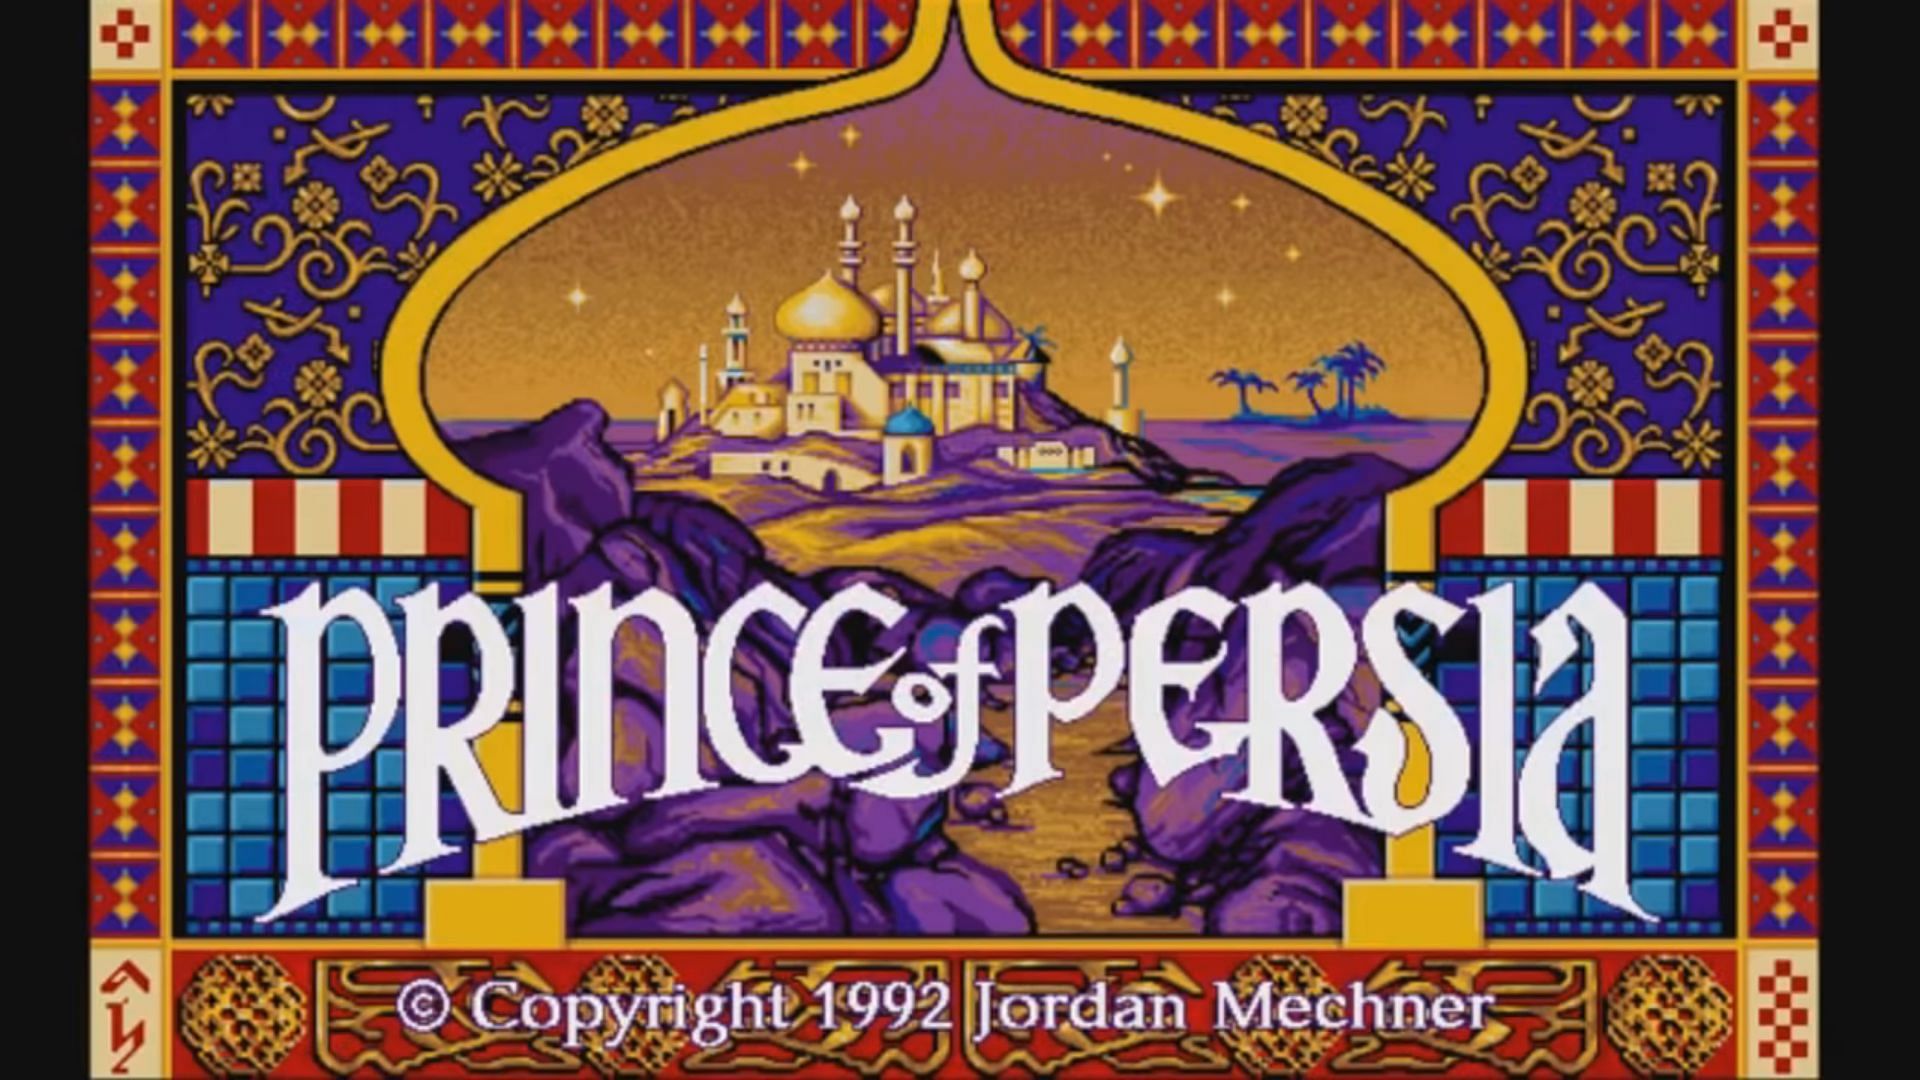 The title page of the 1989 game (Image via Prince of Persia 1989)